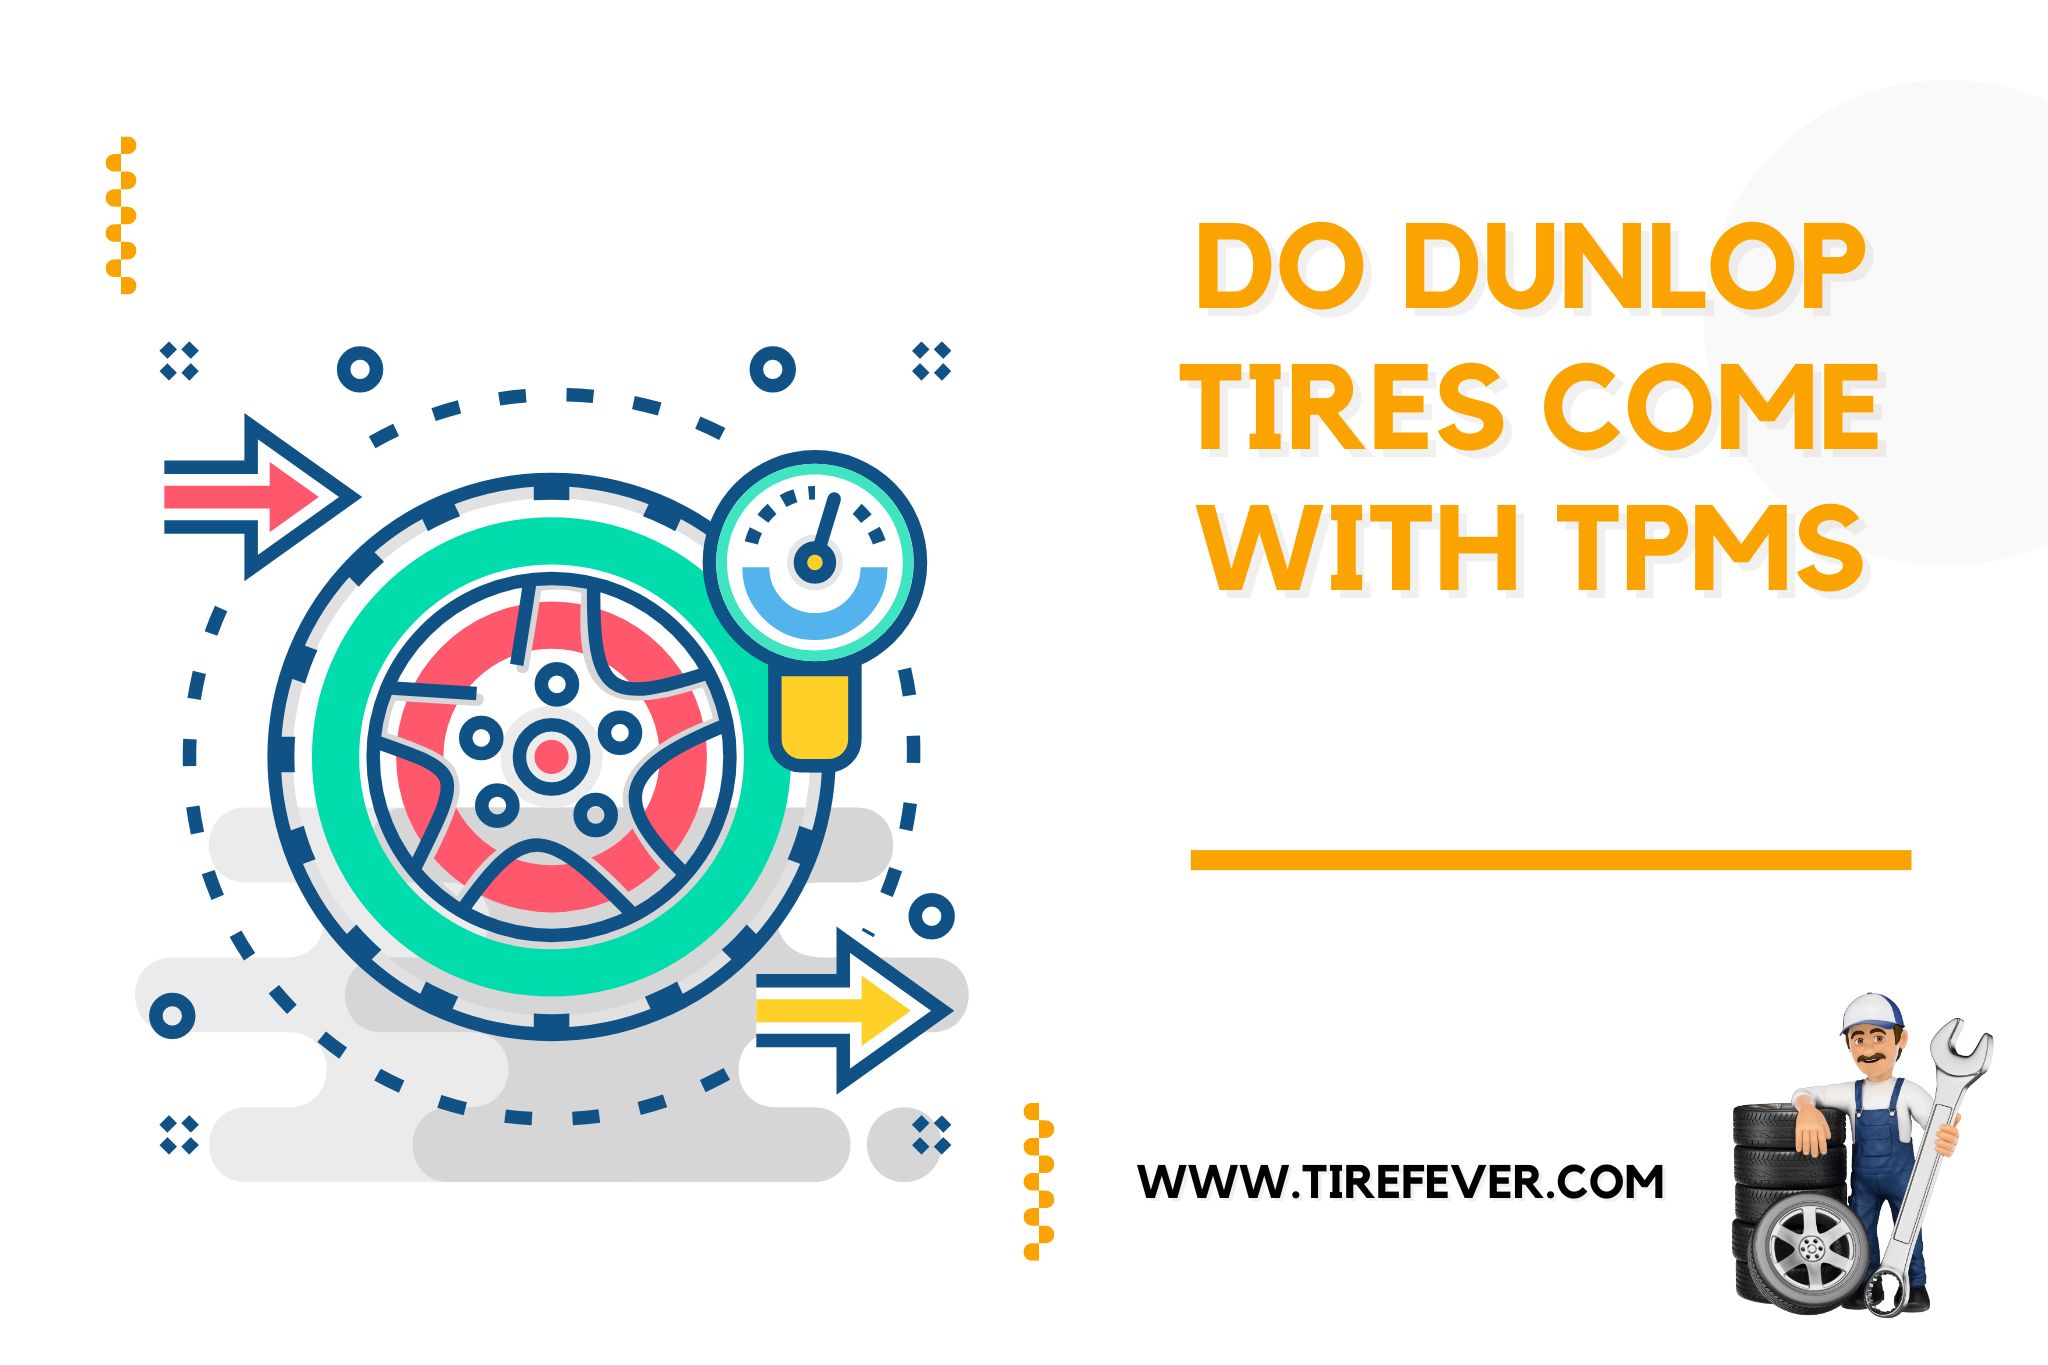 Do Dunlop Tires Come with TPMS